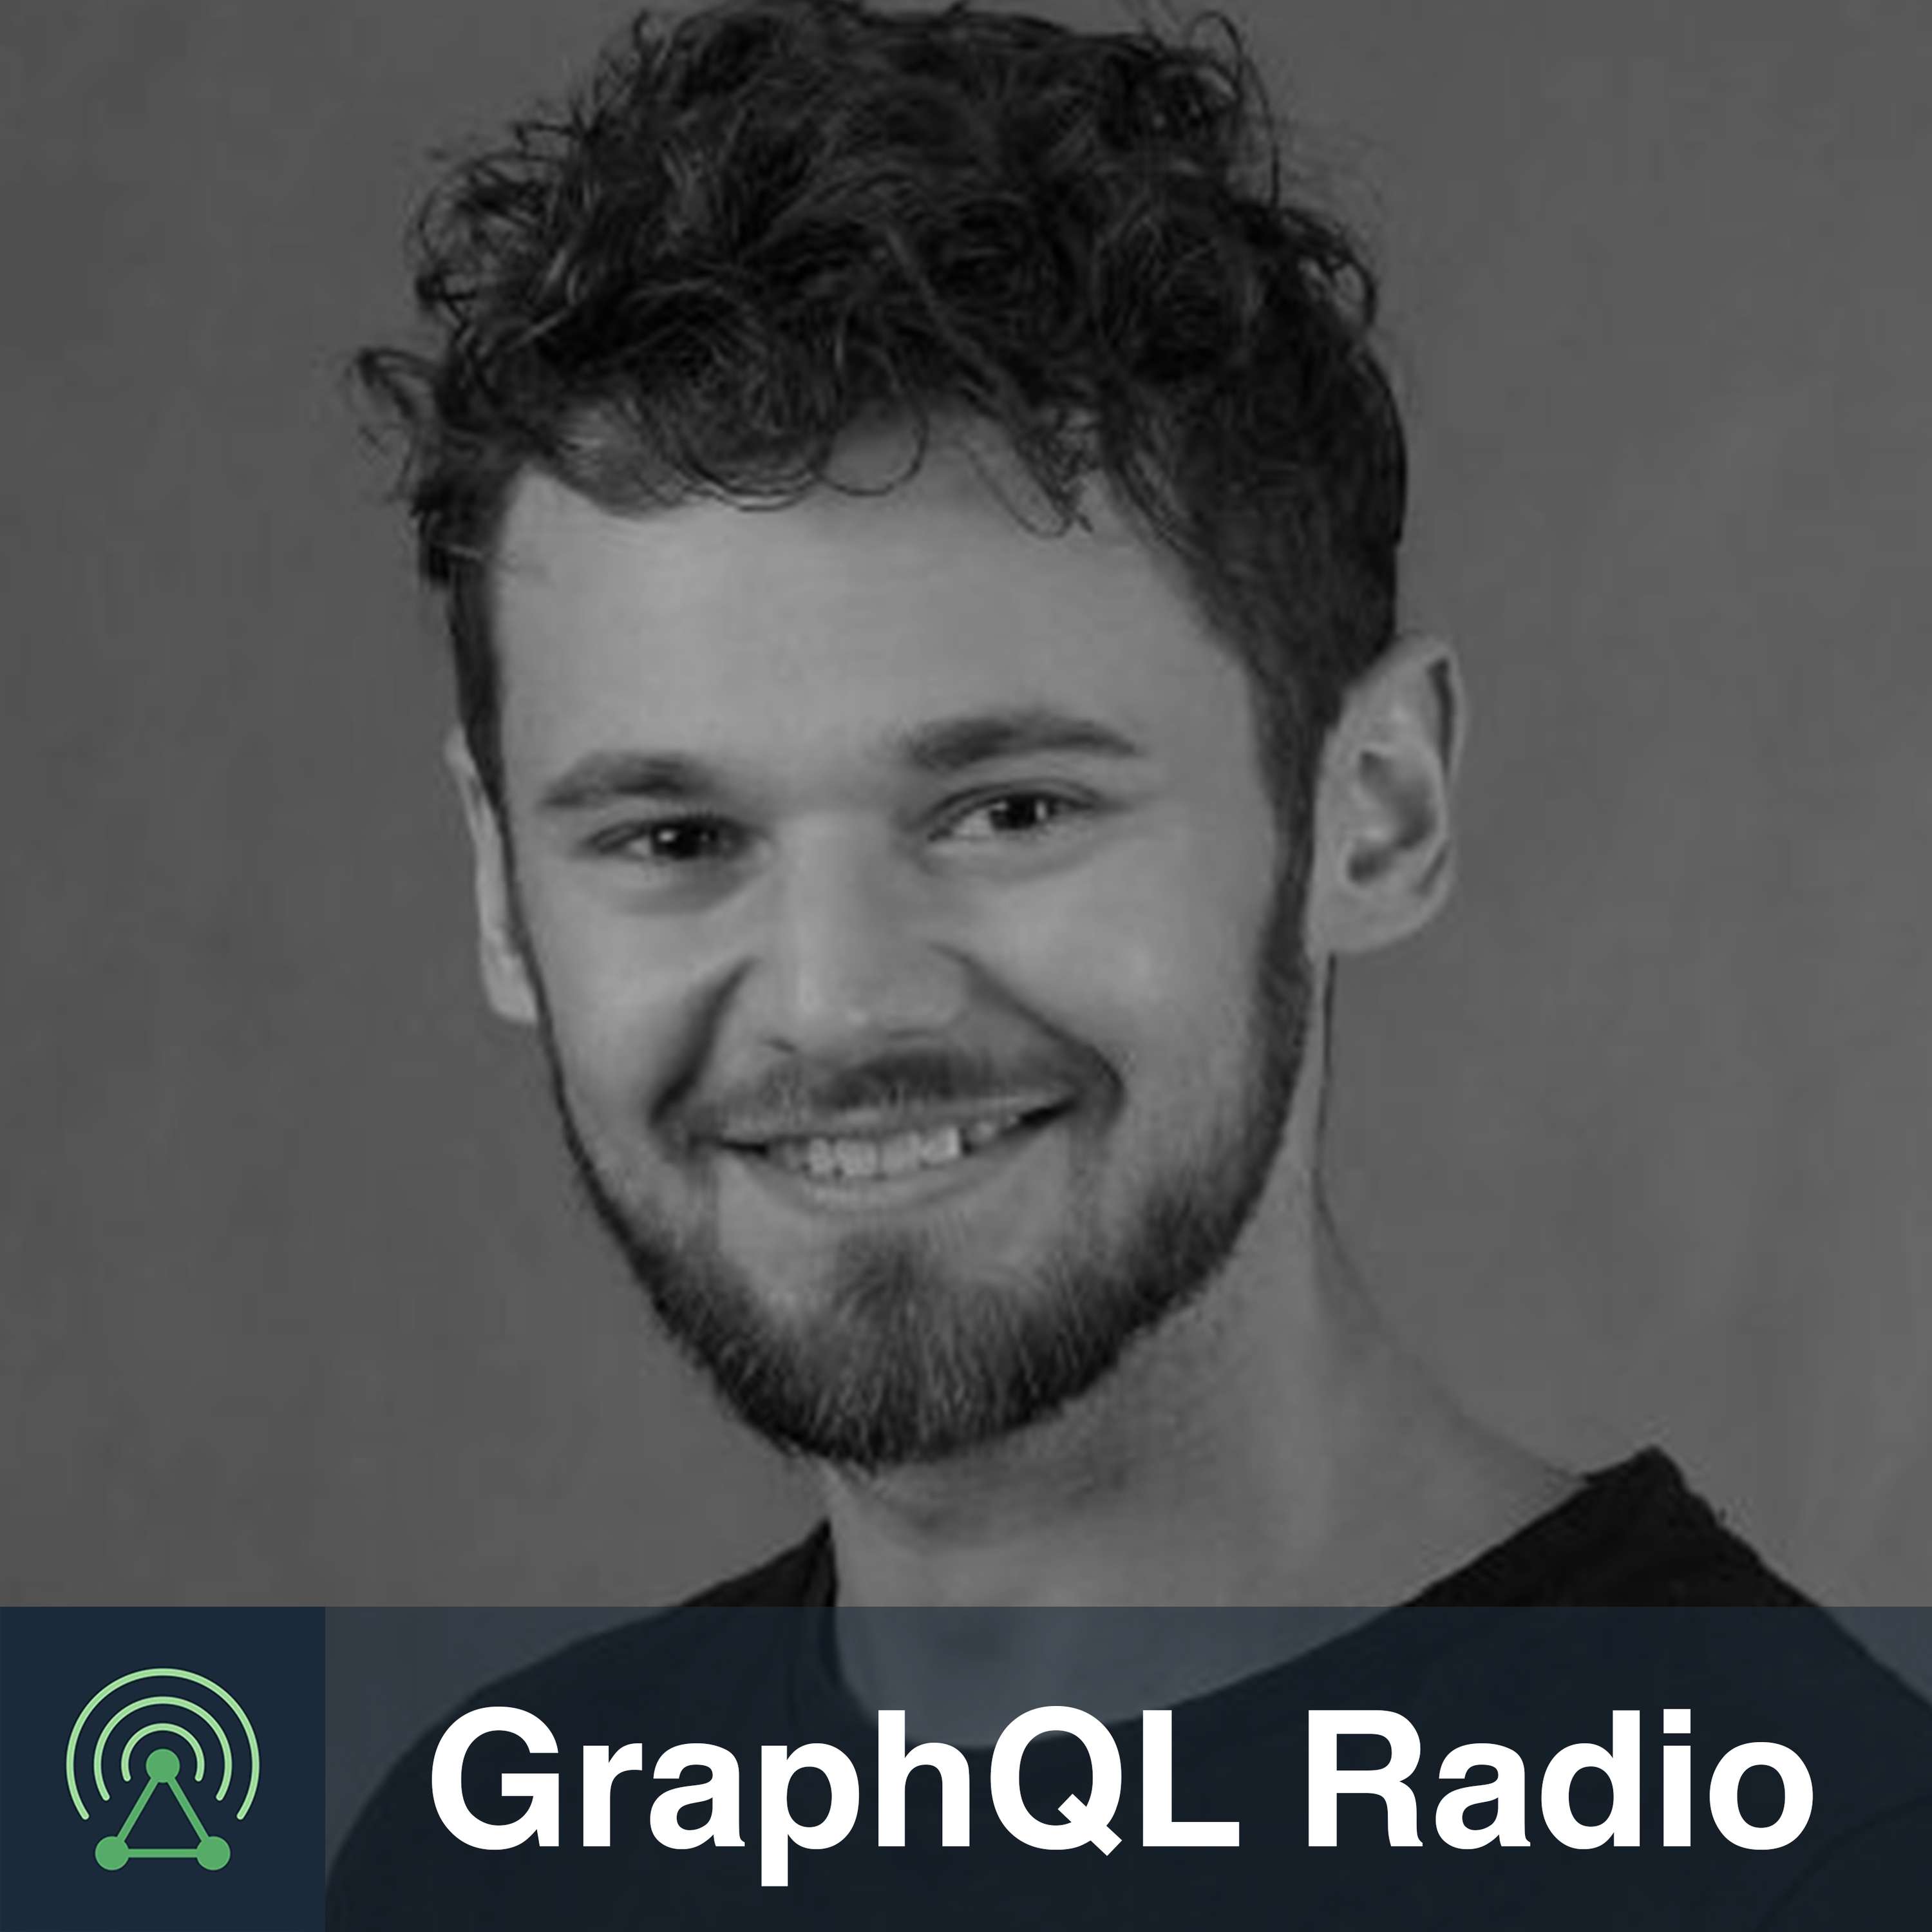 Alessandro Volpicella | Engineering Lead at Hashnode | GraphQL At Hashnode | AWS | Vercel | Developer Blogging | Creating Content | Getting Into Tech | Apprenticeship | Studying Computer Science | Data Science | Enterprise Projects | Side Projects | Bachelor Thesis | Hashnode’s Scale | Lean Team | Hashnode’s Architecture | Edge Caching | API Design | Moving To GraphQL | GraphQL vs REST | Stripe’s API Design | Cloudflare | DDoS Protection | MongoDB & Atlas | Redis | Hashnode’s Team | Caching Considerations | Using Stellate | Event Types | Cache Purging | Public API Challenges | Rate Limiting | Security Problems | Schema Design | Vercel API Functions | NoSQL Databases